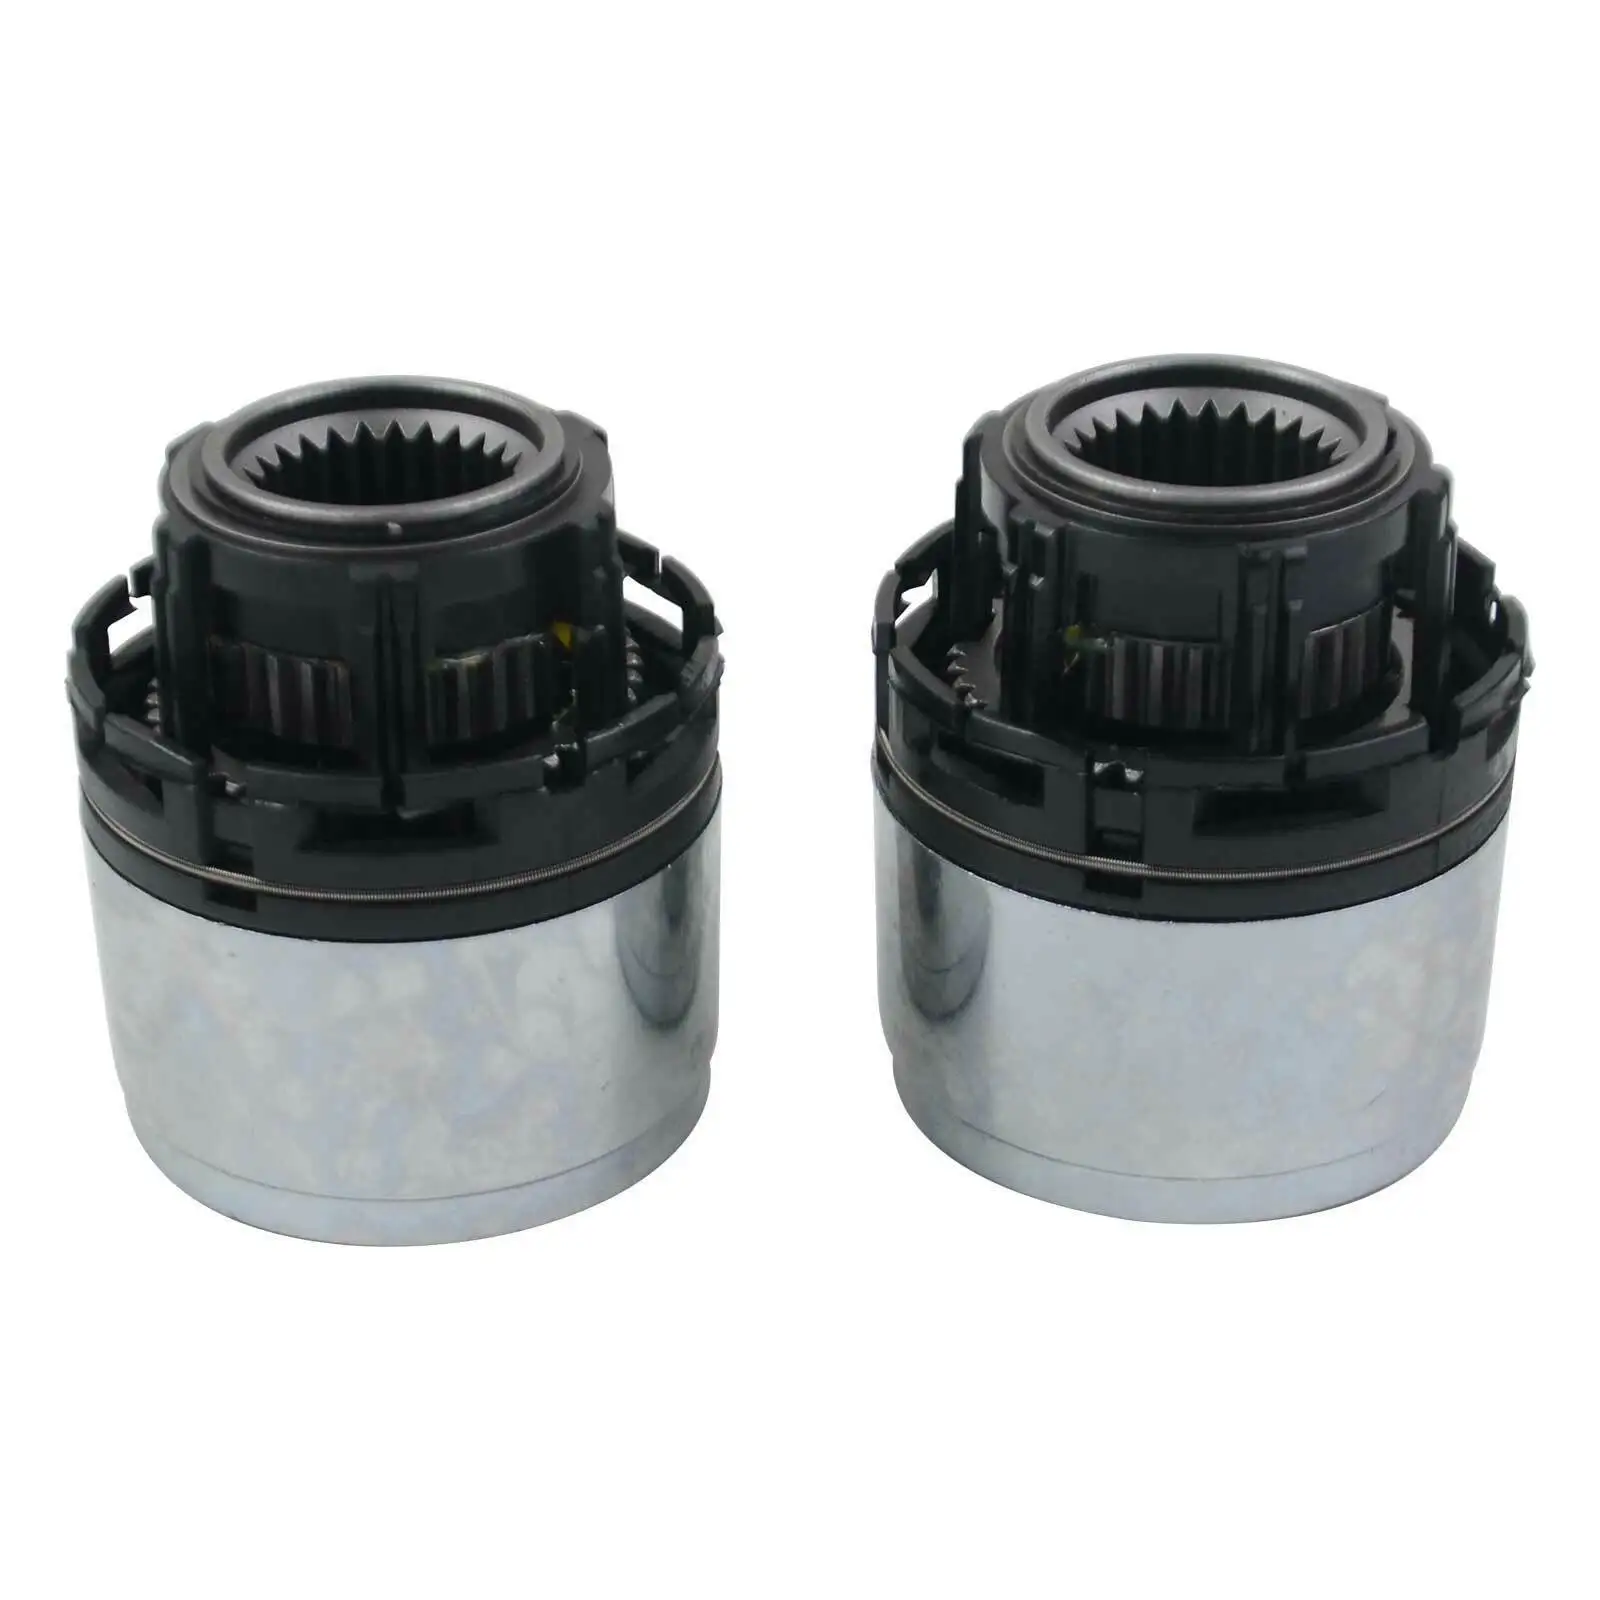 2-pack Manual Locking Hub fits for Ford Ranger 1998-2000, Spare Parts